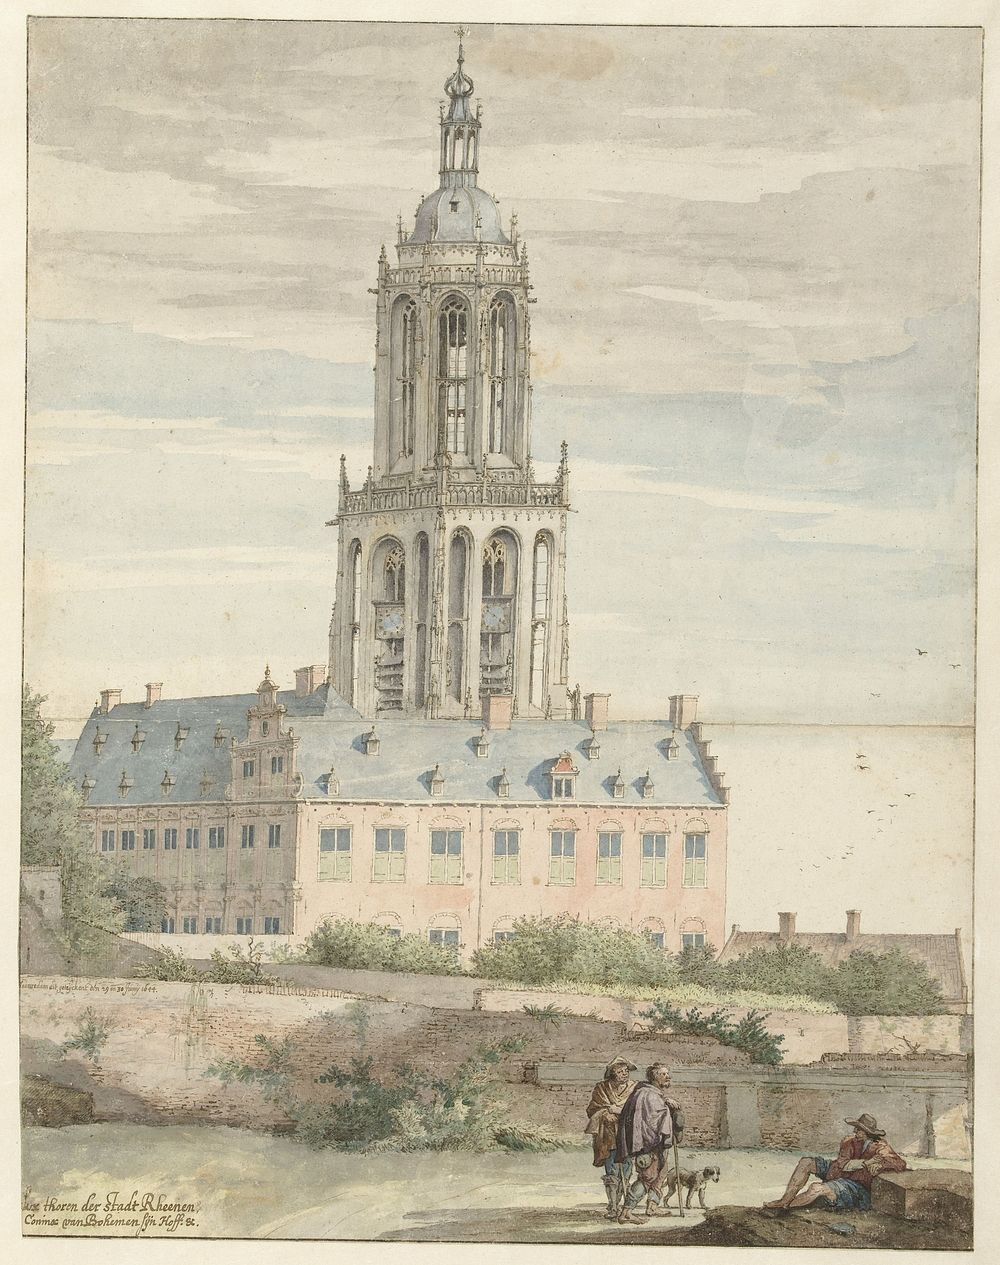 View of the Palace of Frederik V, Elector Palatine, and the Sint-Cunerakerk, Rhenen (1644) by Pieter Jansz Saenredam and…